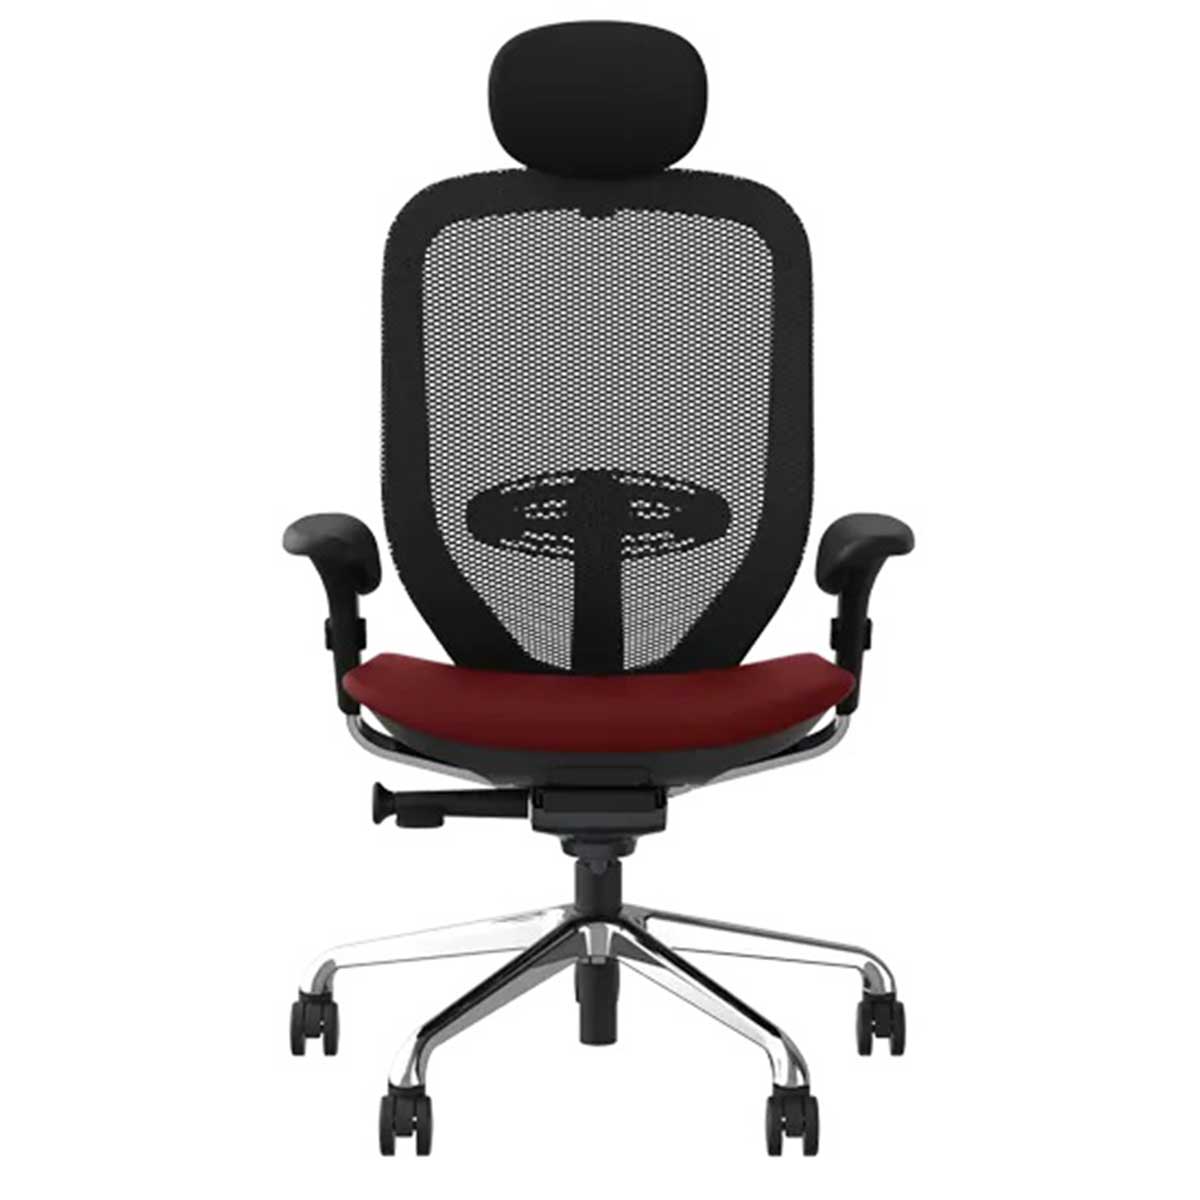 Ergonomic Chairs Manufacturers, Suppliers in Rohini Sector 14